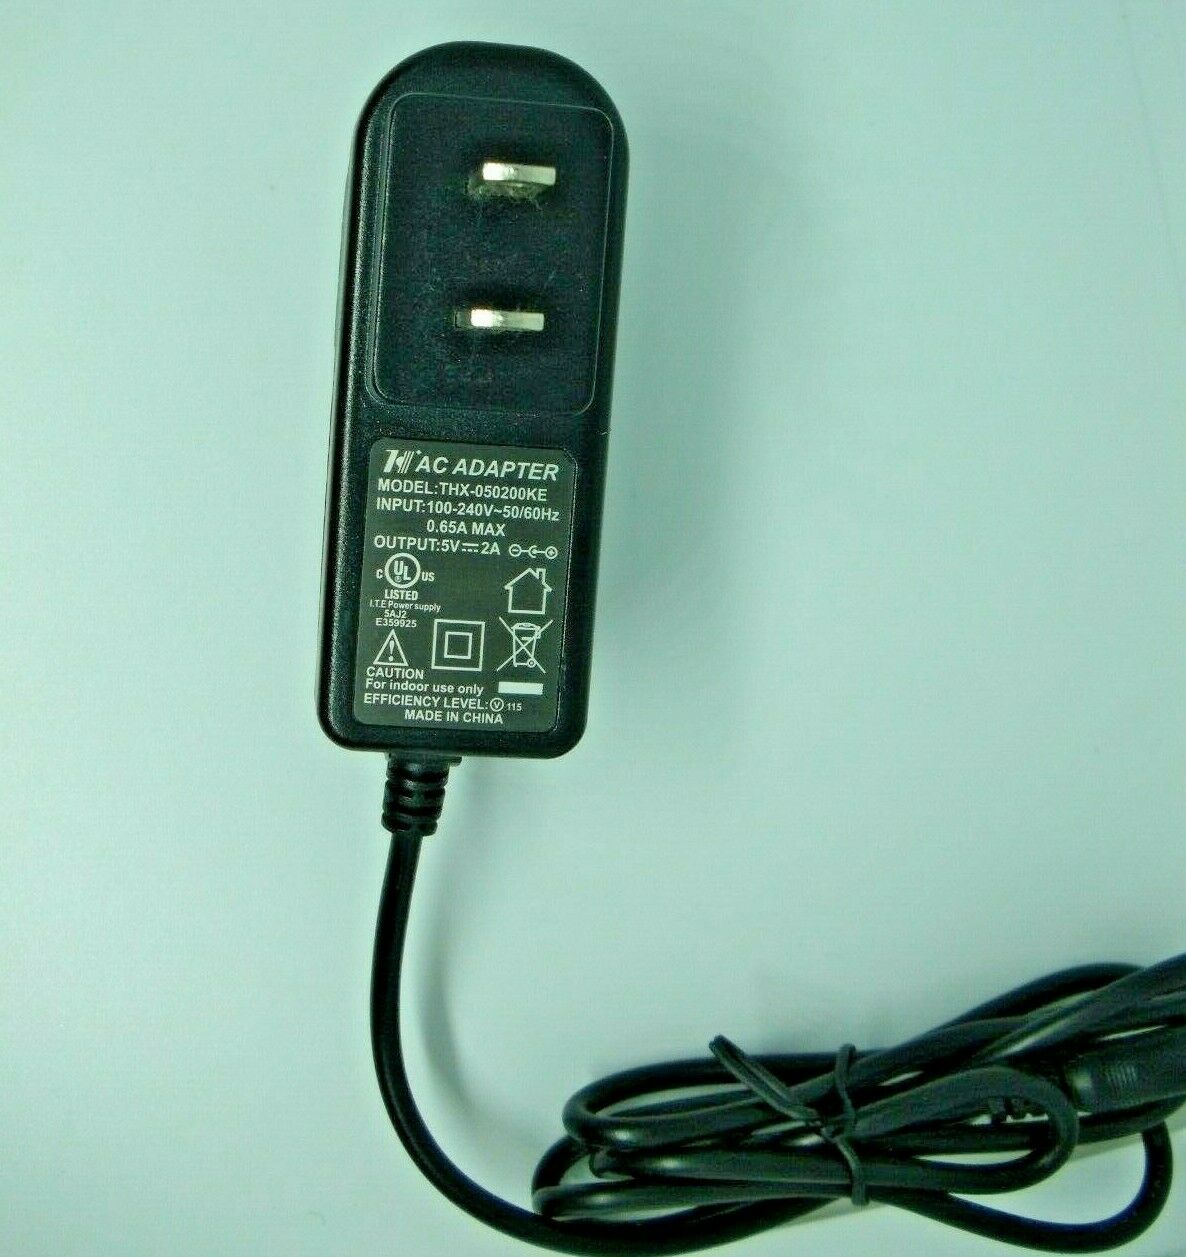 AC DC Power Supply Adapter THX-050200KE Output 5v 2A Thin Plug USA SELLER Type: Adapter Features: Powered Cable Leng - Click Image to Close